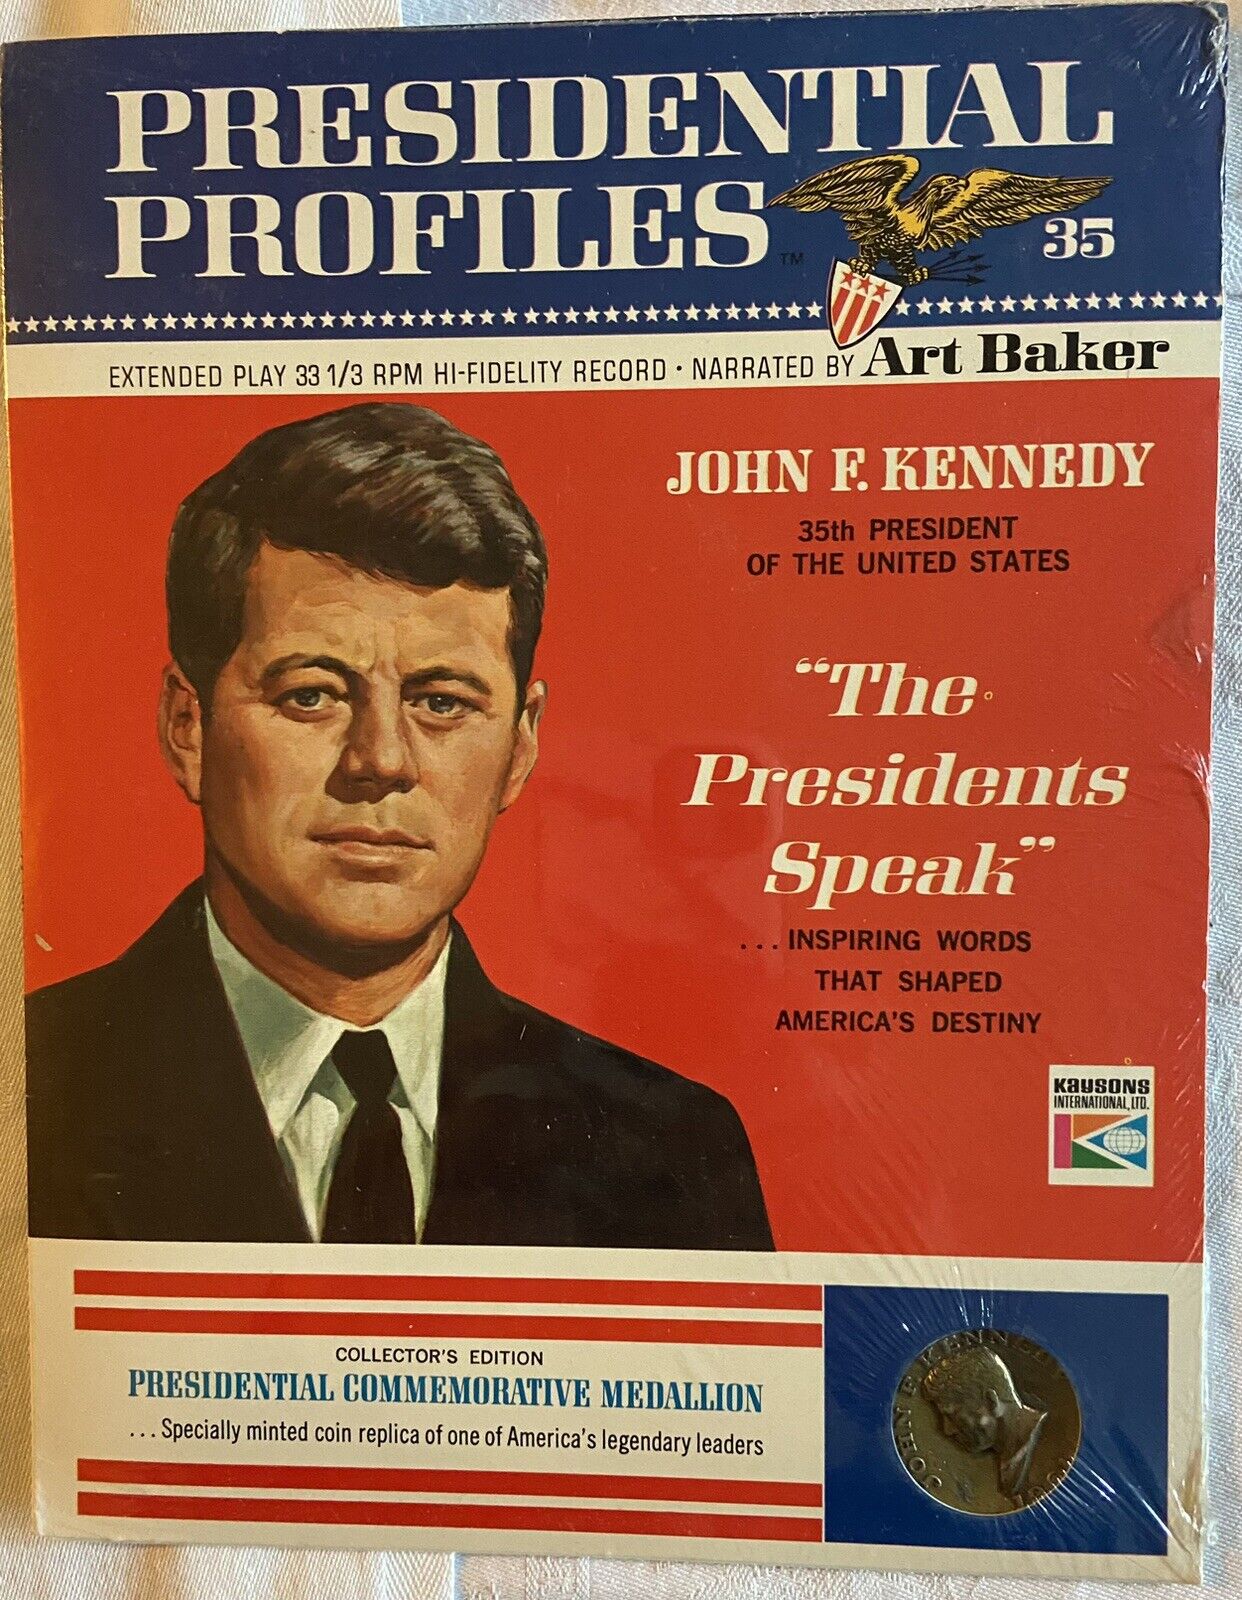 Presidential Profiles - Sealed John F Kennedy includes Record